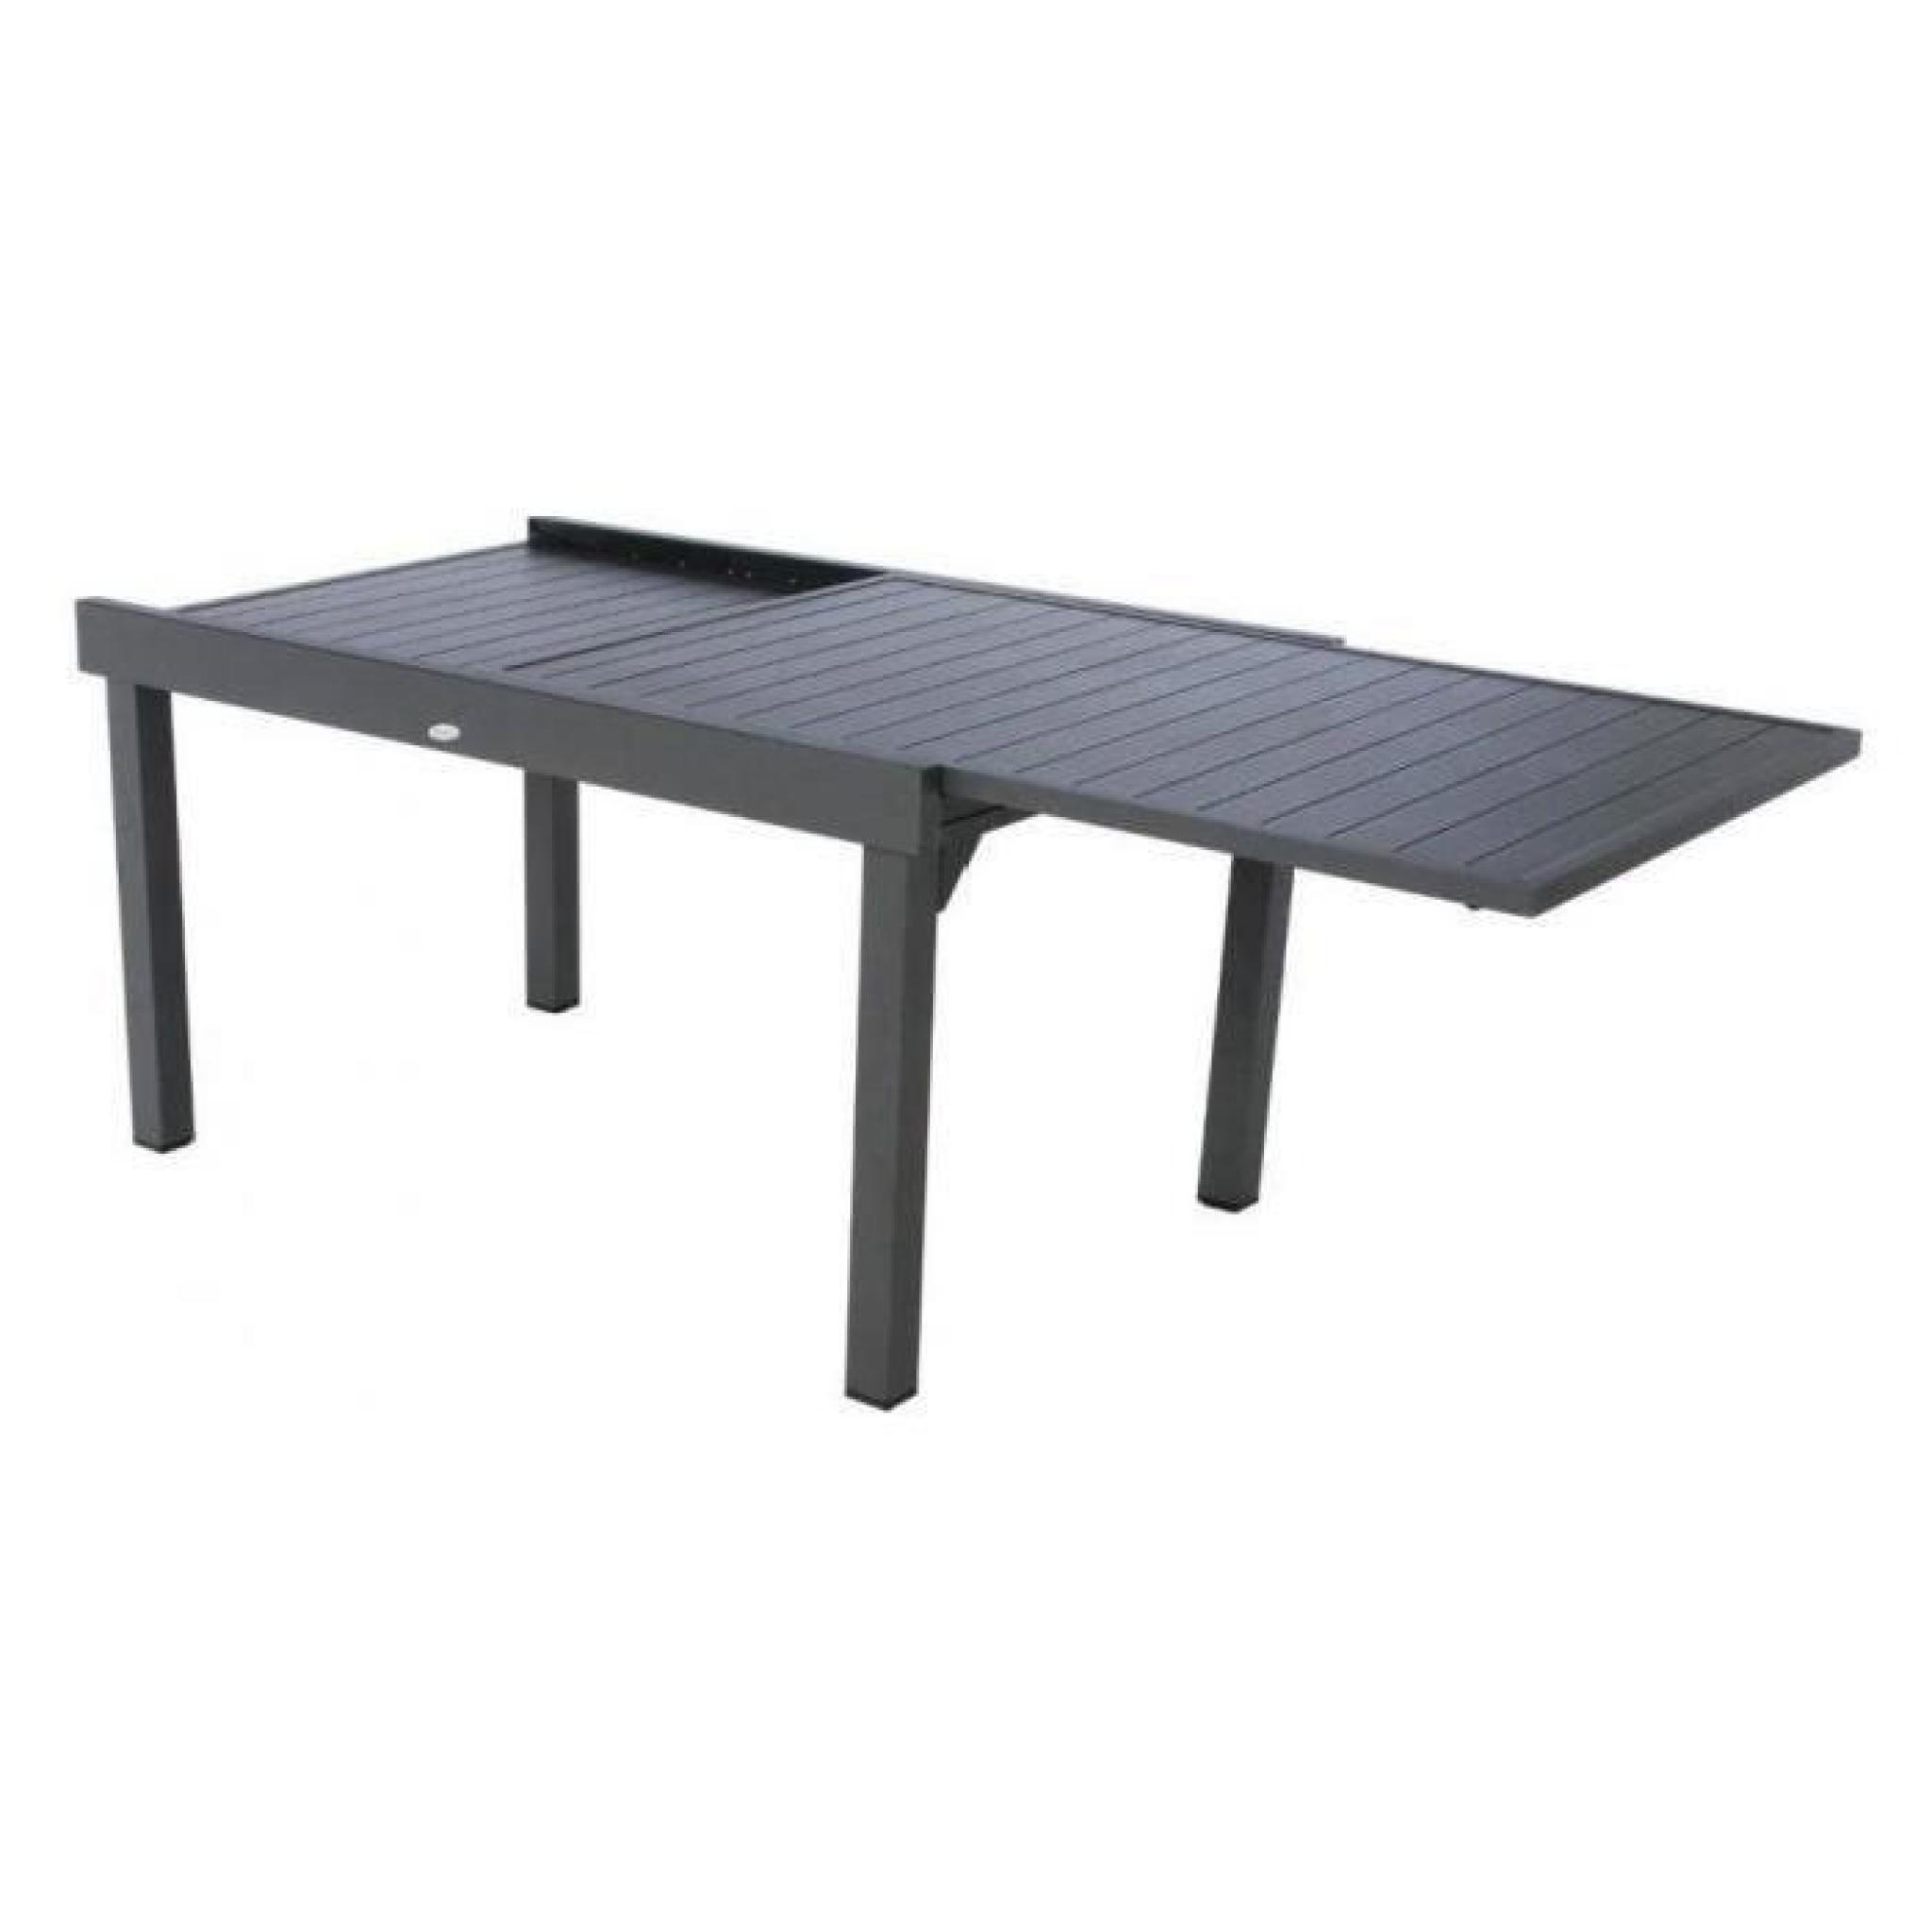 TABLE PIAZZA ALU HESPERIDE EXTENSIBLE 10 P. GRAPHITE pas cher